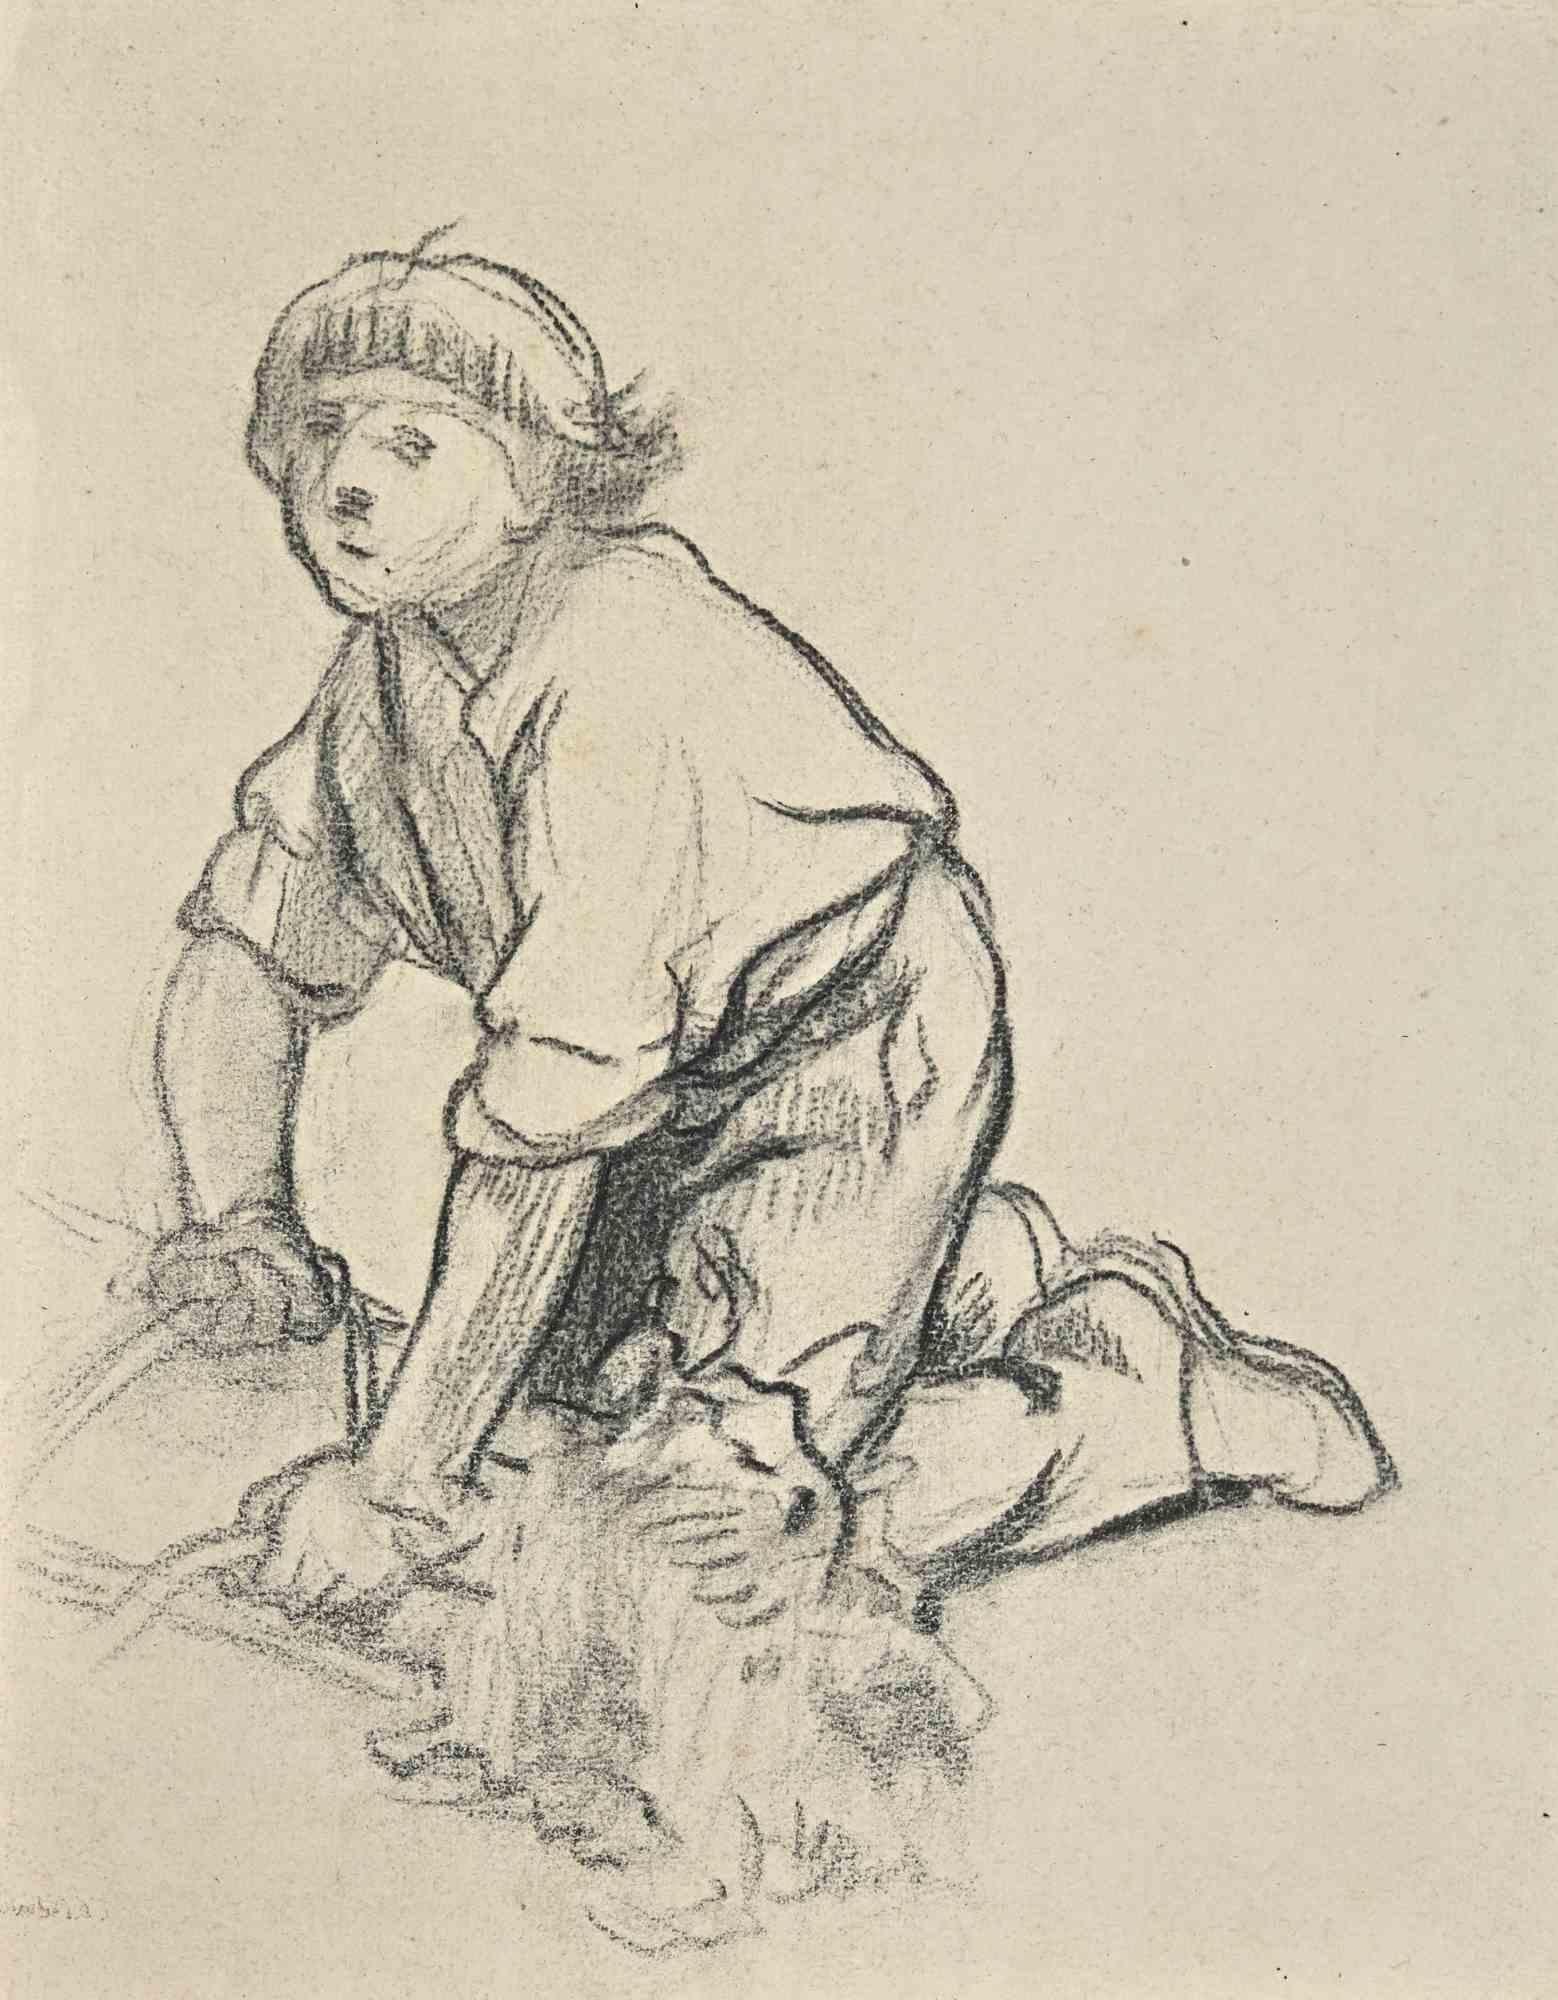 Working Child is a drawing on creamy color paper realized by Tibor Gertler in the mid-20th century.

Charcoal drawing.

Good conditions, aged margins.

The artwork is uniquely depicted his subject by combining the intensity of charcoal with bold and